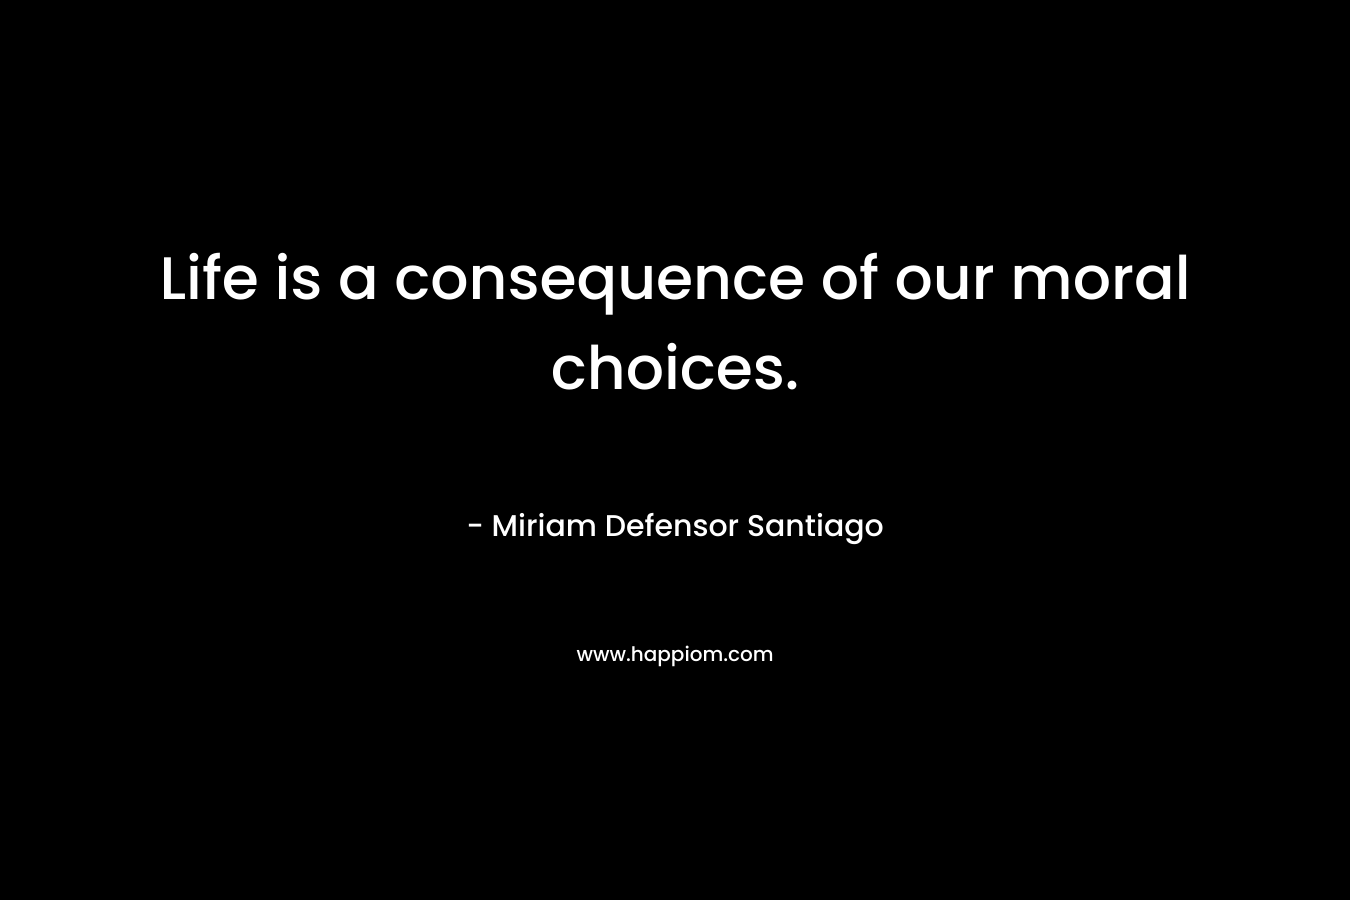 Life is a consequence of our moral choices.